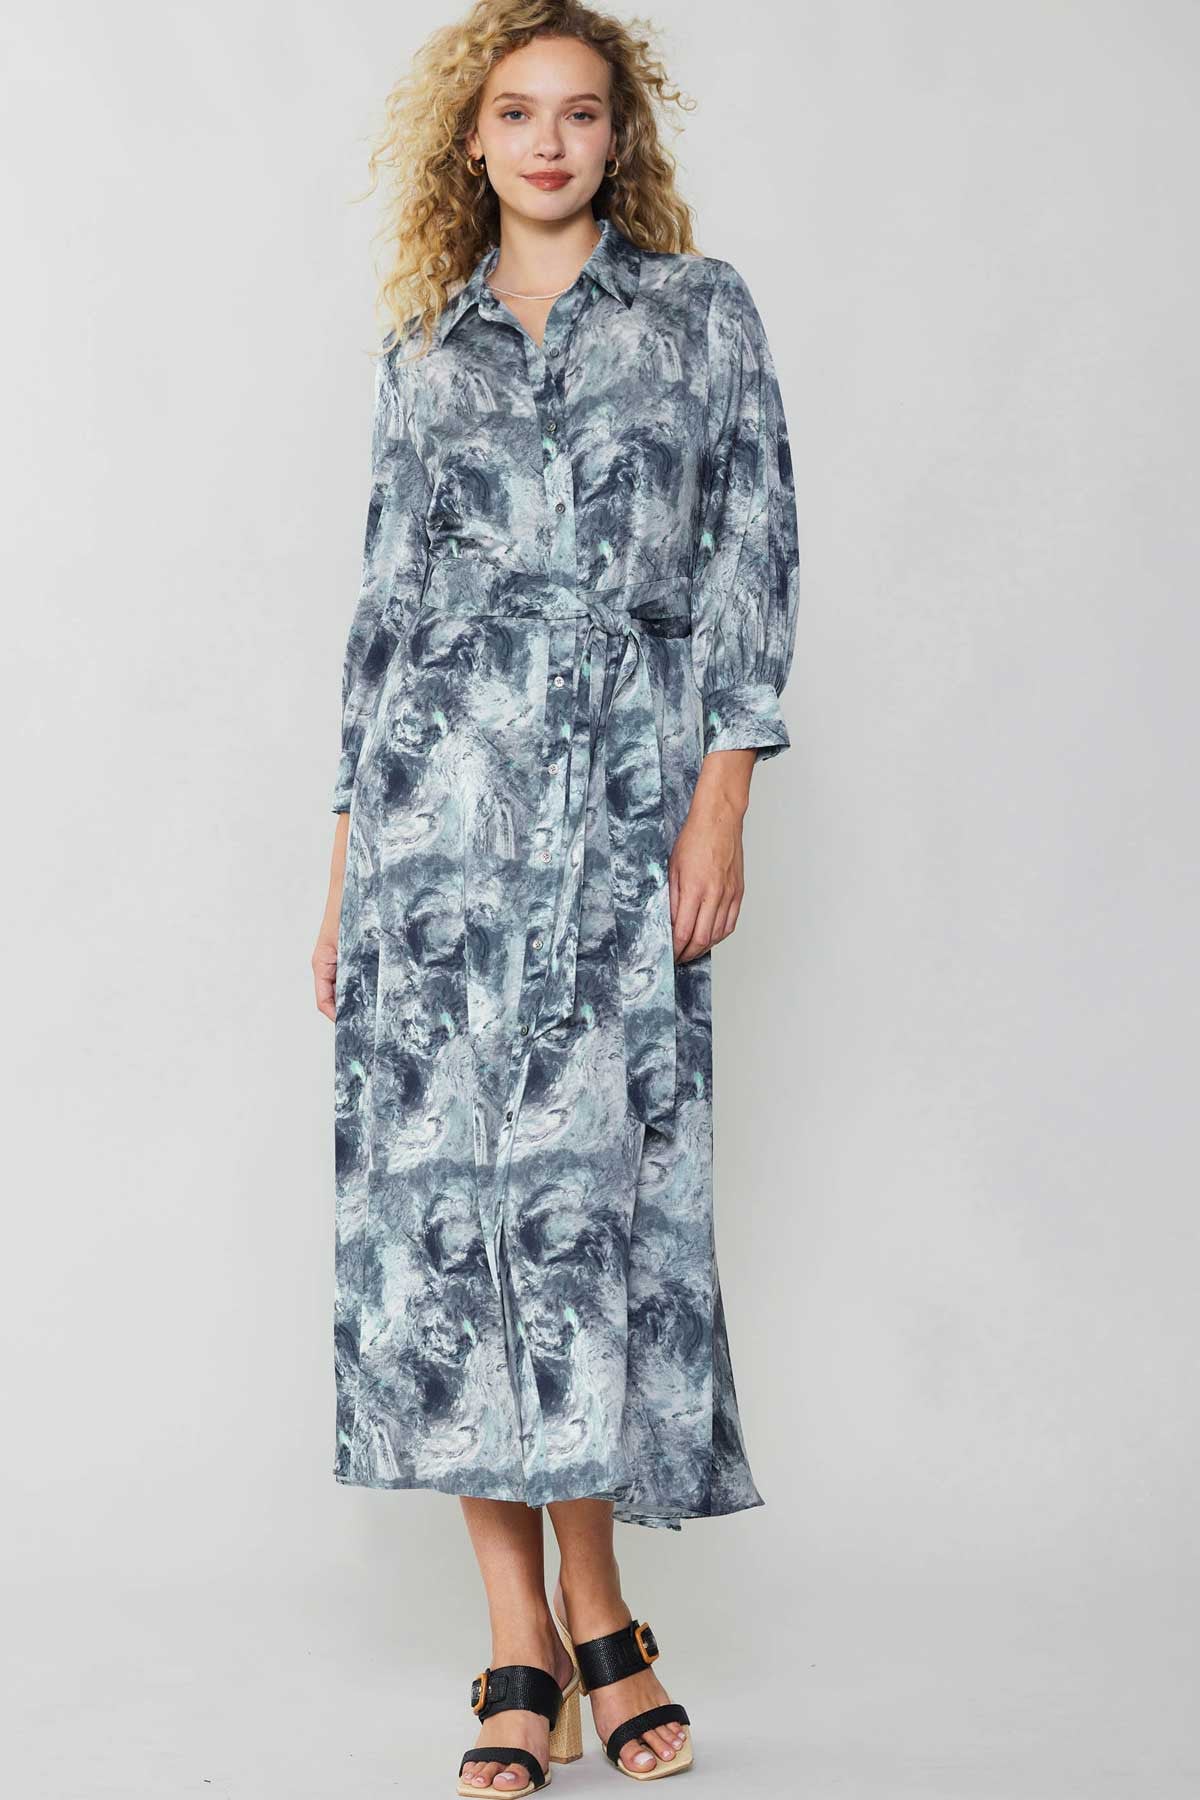 Abstract Printed Button Down Shirt Midi Dress in grey multi by Current ...